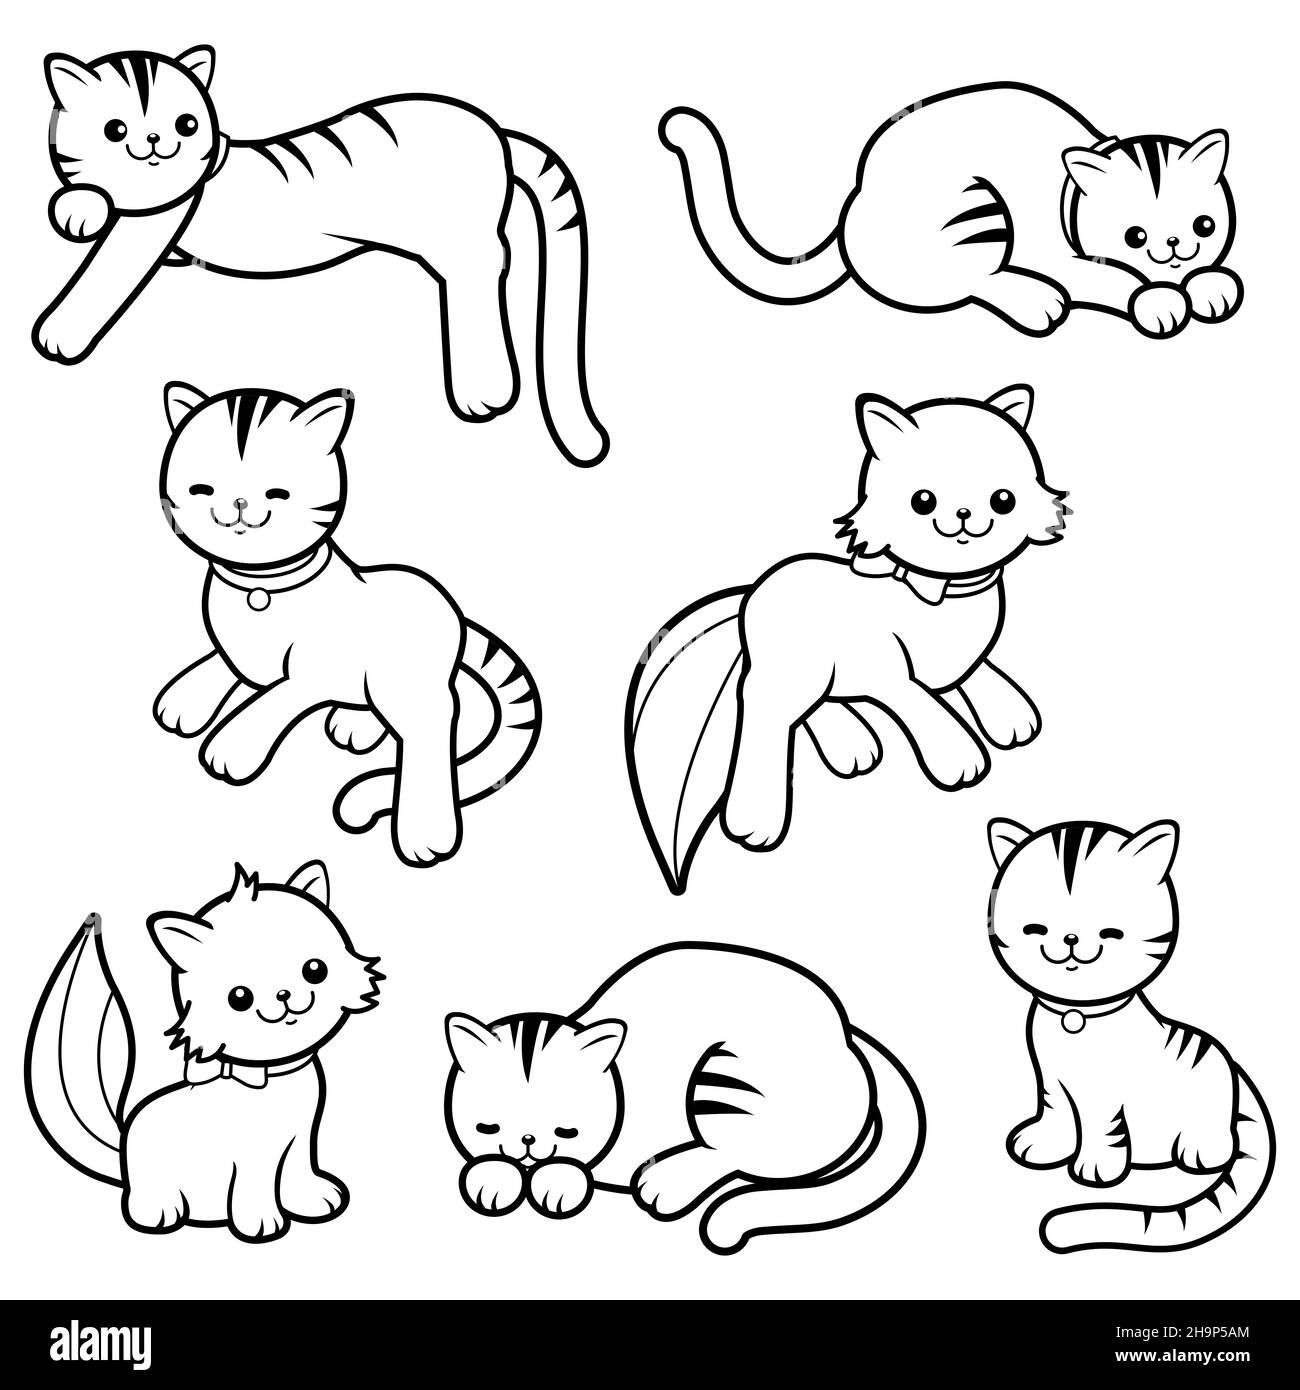 Cartoon cats collection. Black and white illustration Stock Photo